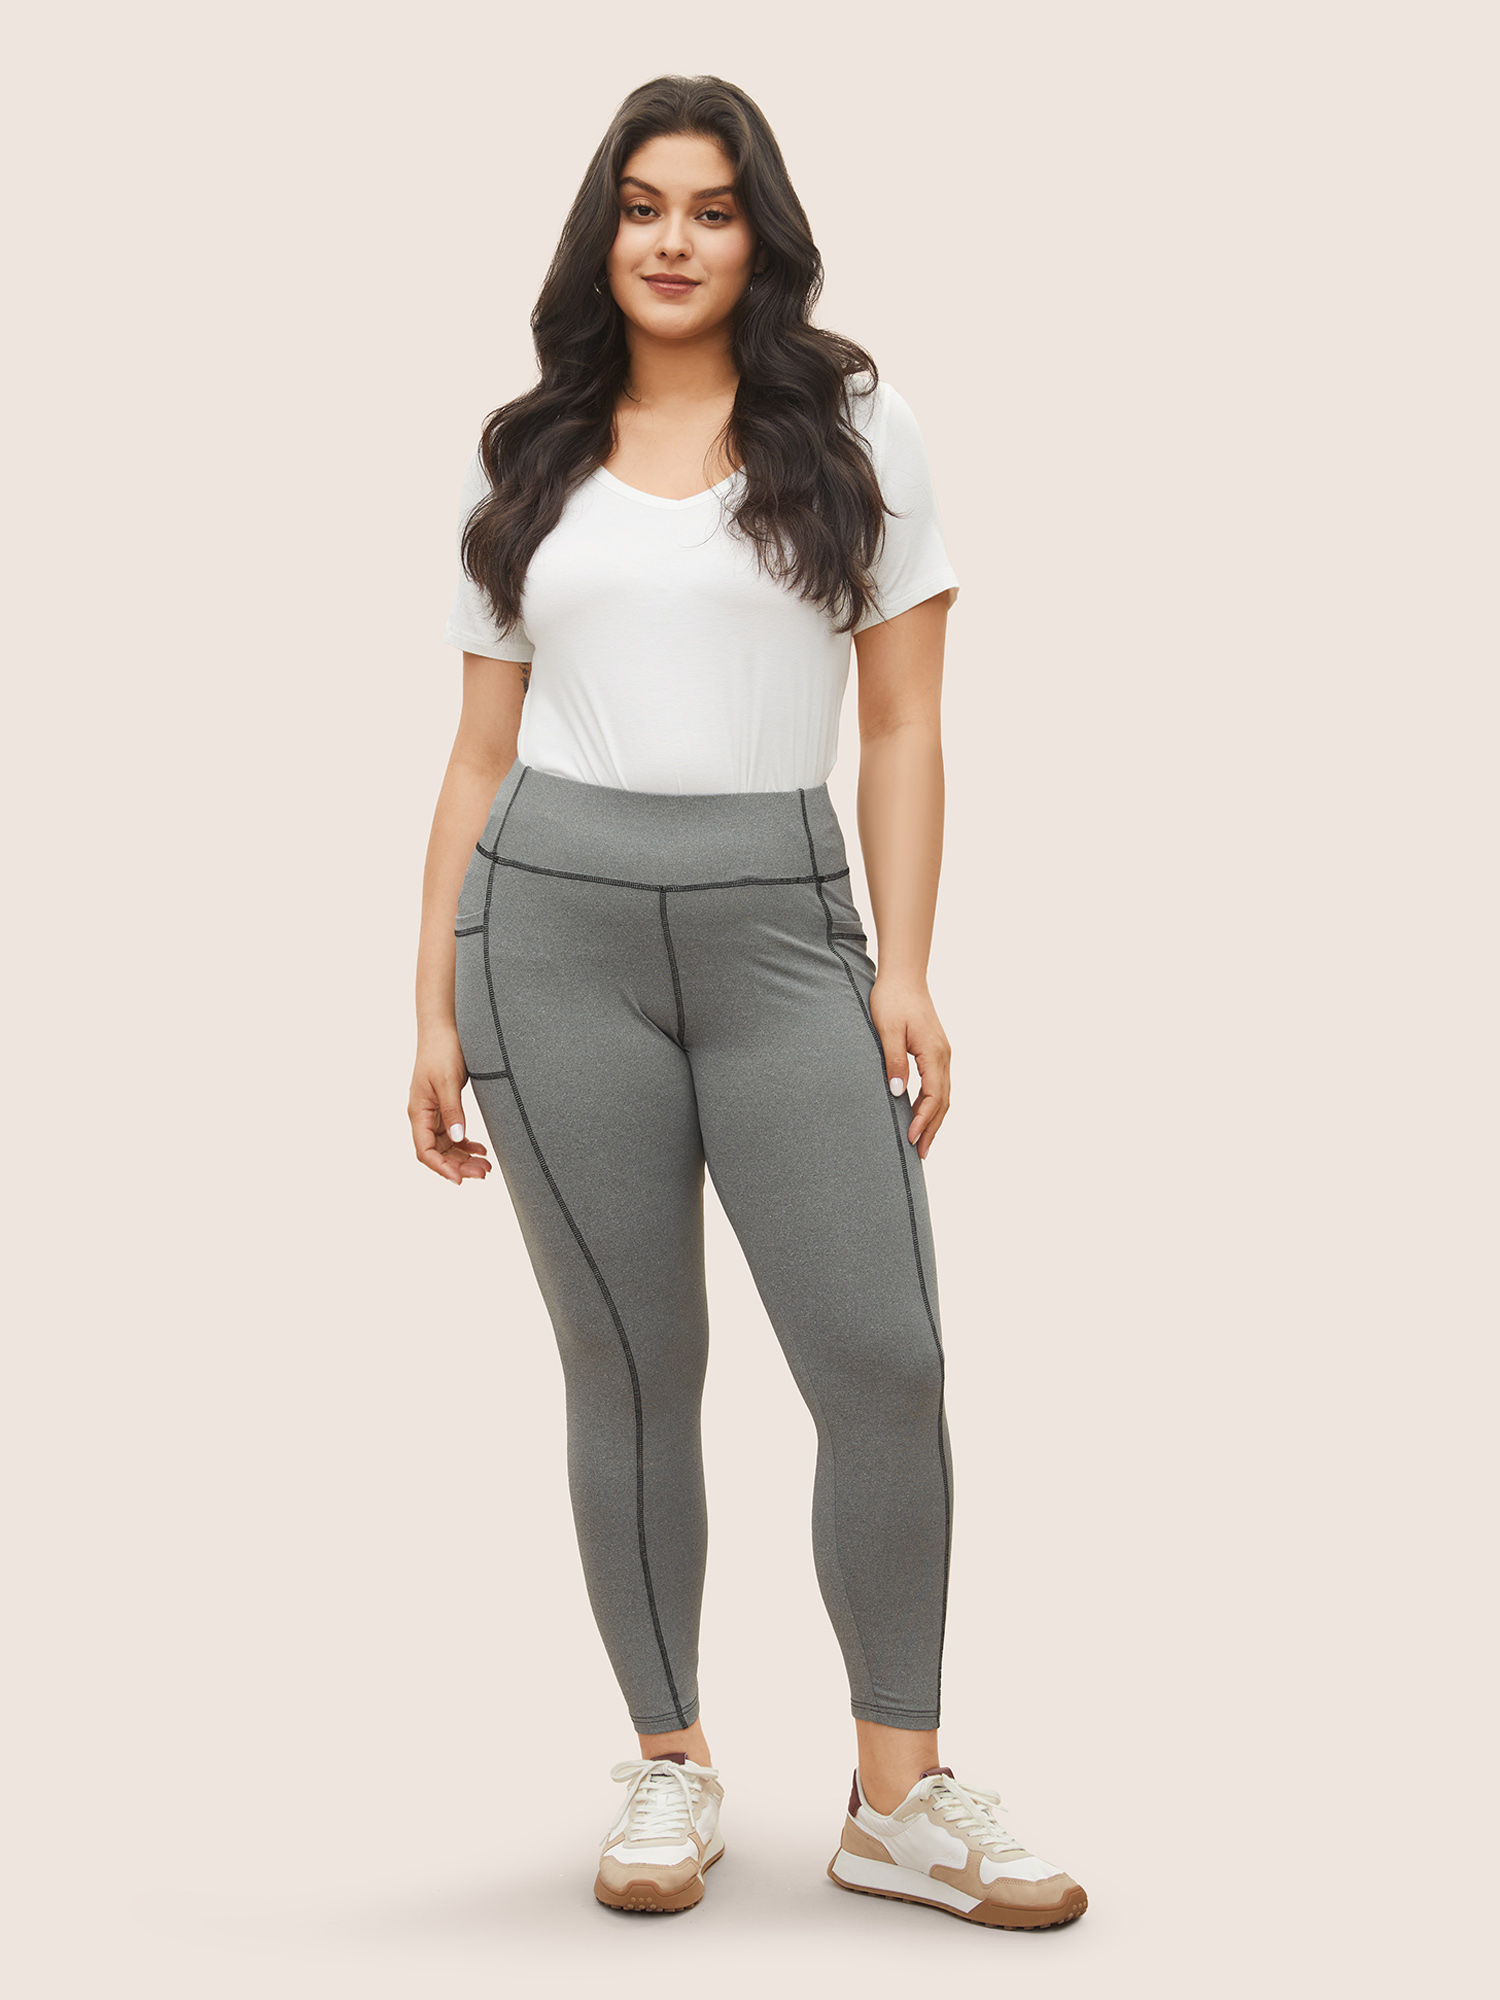 

Plus Size Contrast Trim Side Pocket High Rise Leggings Women Gray Casual High stretch High Rise Everyday Leggings BloomChic